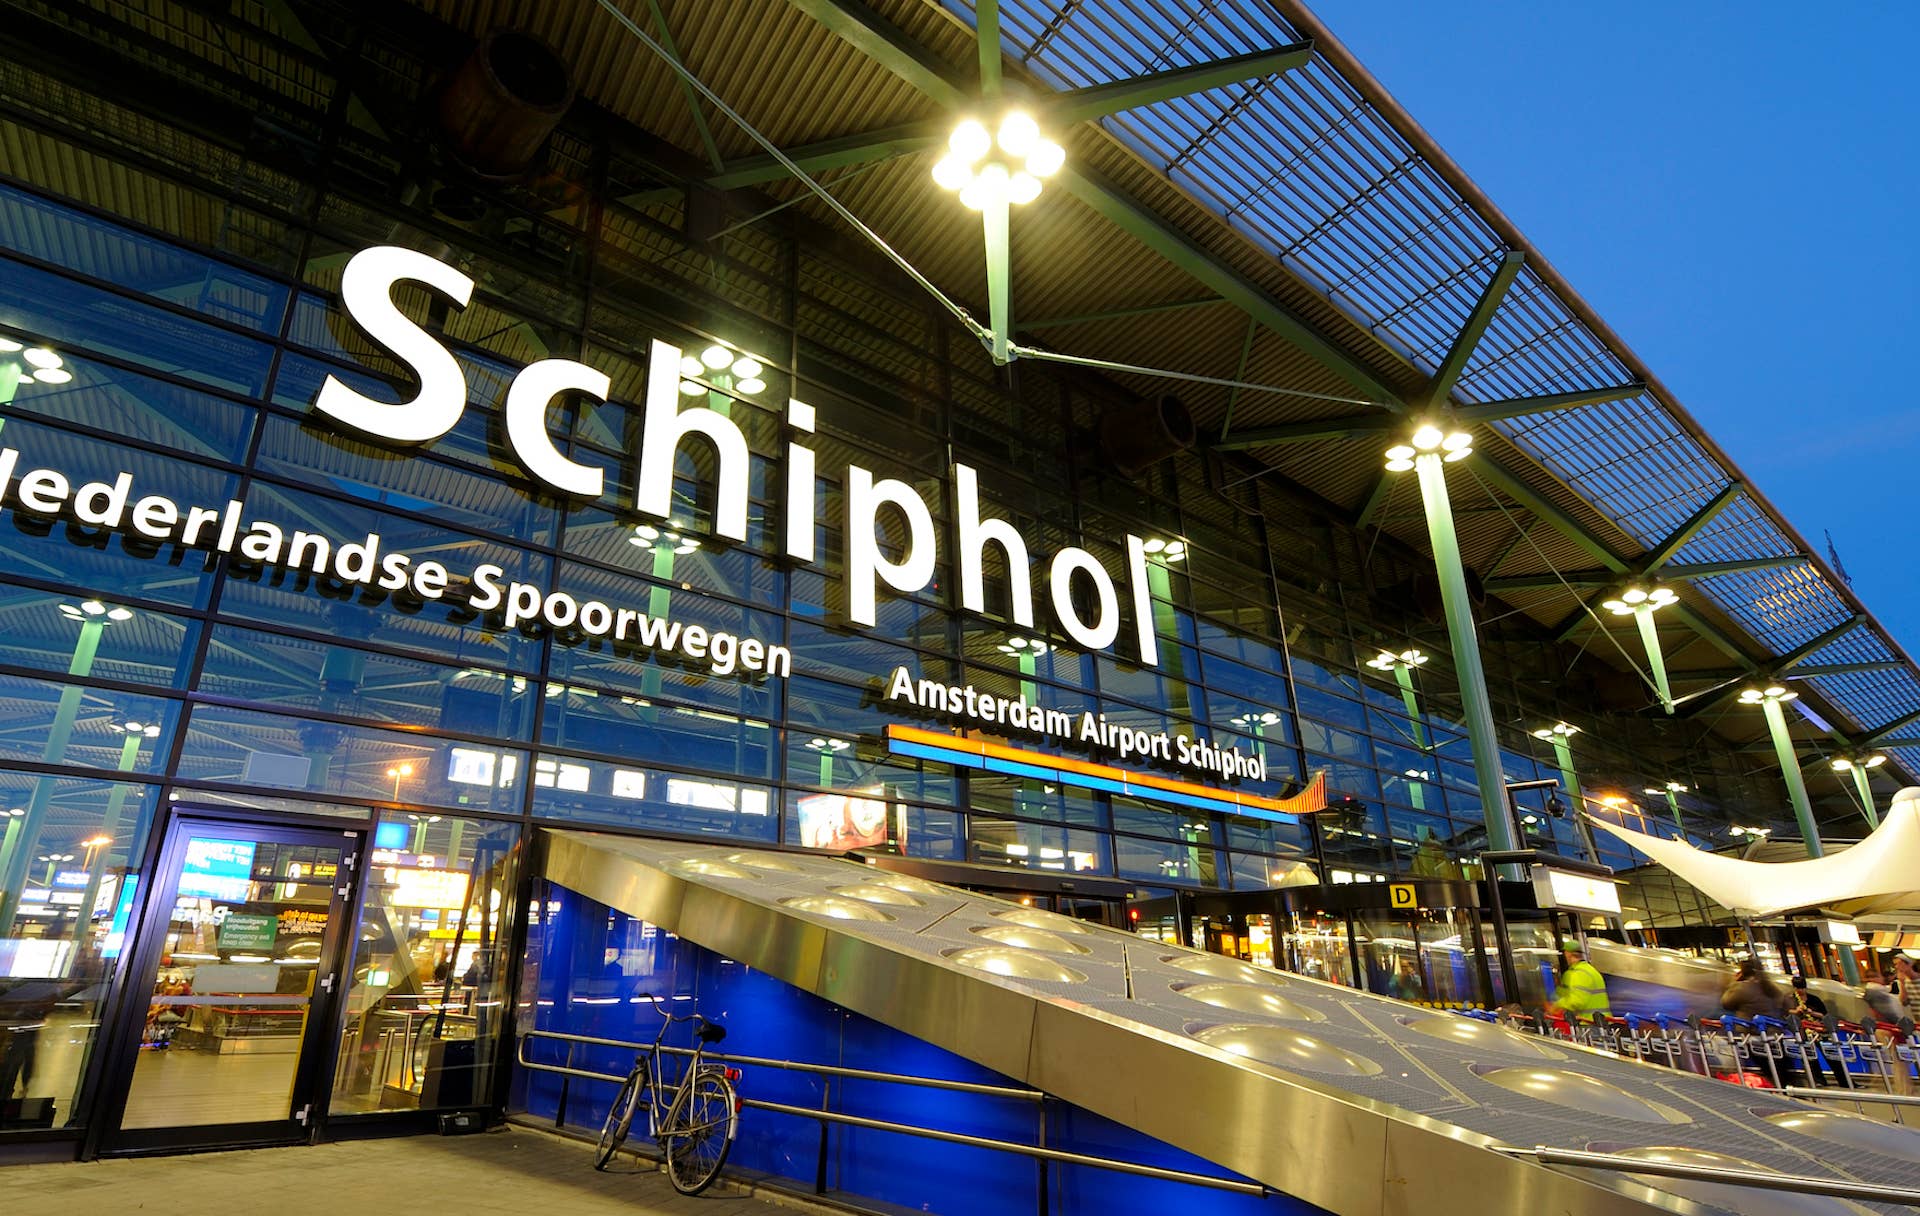 Schiphol Airport in Netherlands